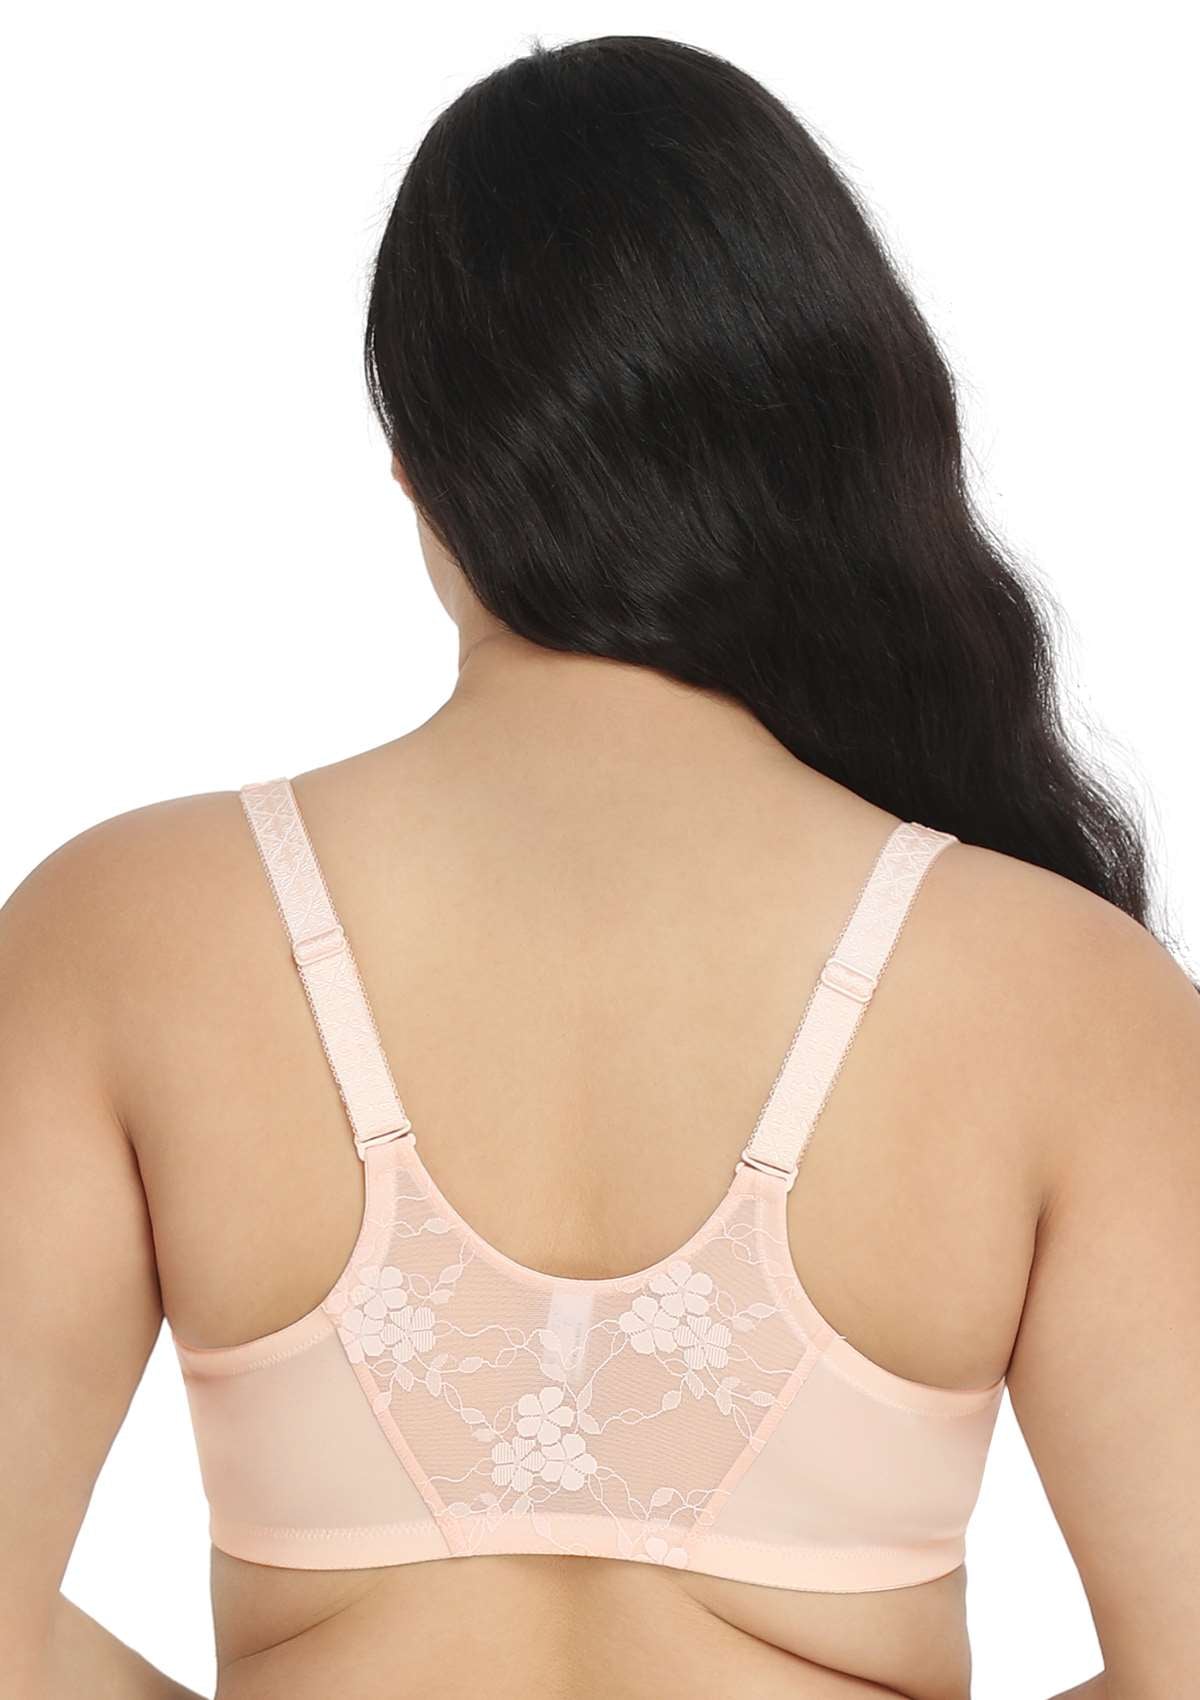 HSIA Spring Romance Front-Close Floral Lace Unlined Full Coverage Bra - Dusty Peach / 36 / DDD/F